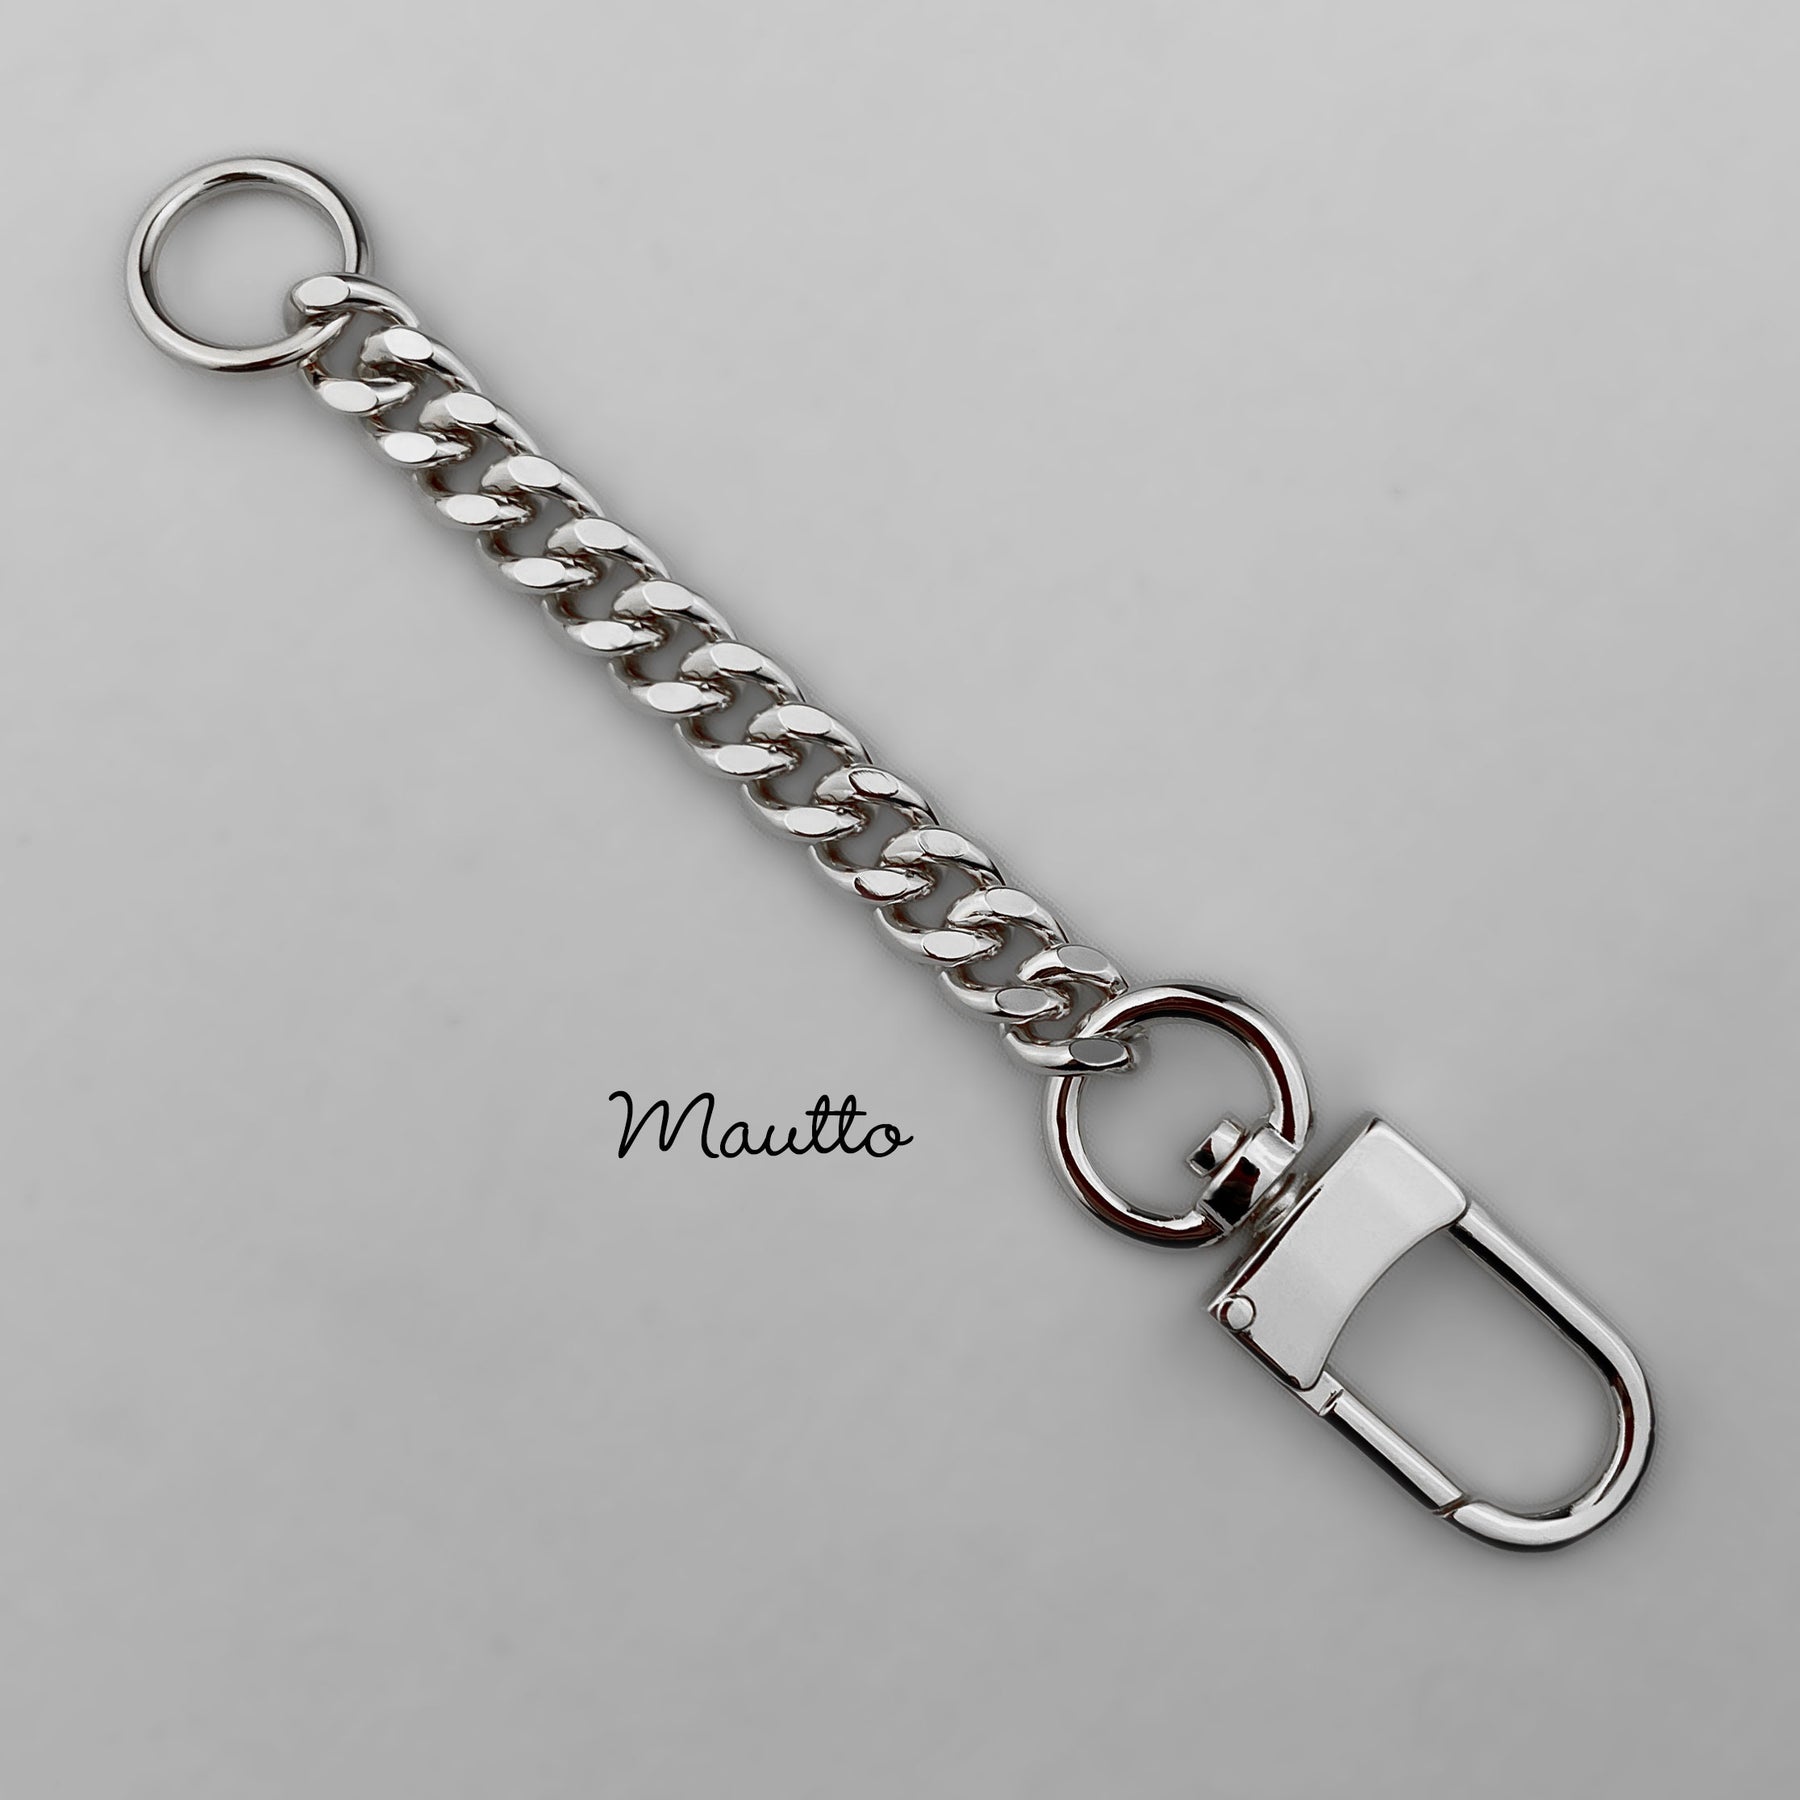 Mautto All-in-One Chain Accessory: Strap Extender, Key Fob Tether, Key Chain Silver-Tone / 8 Inches